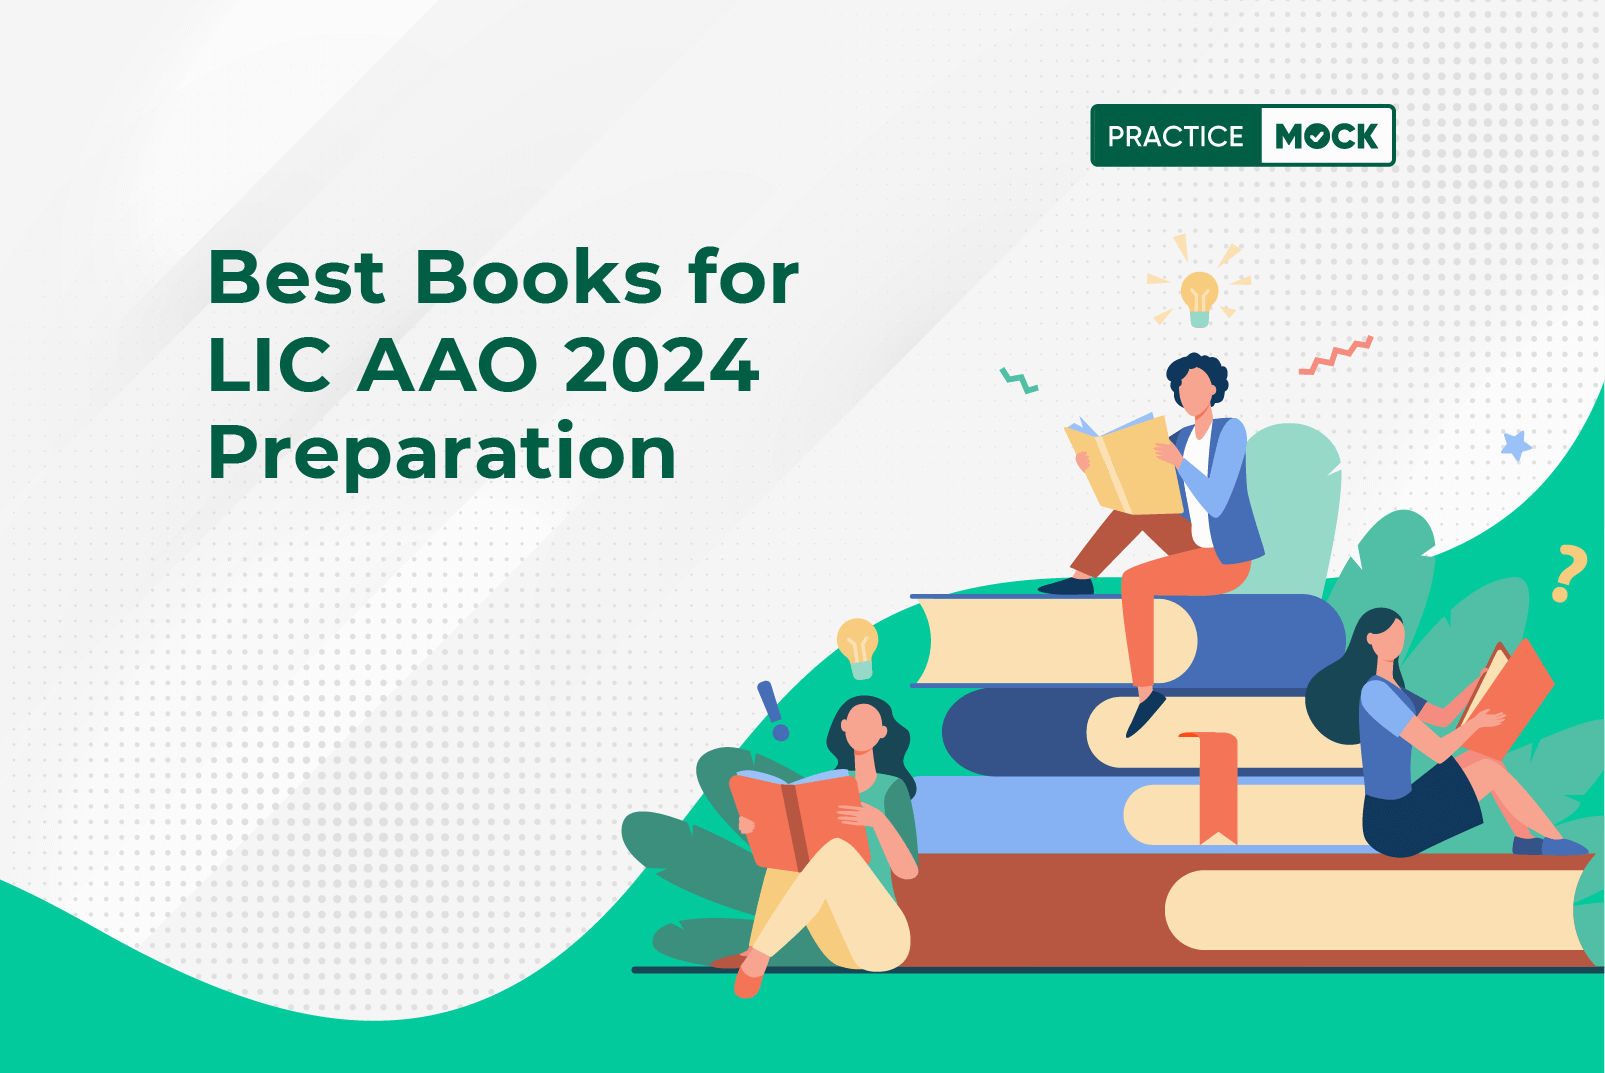 Best books for LIC AAO 2024 Preparation